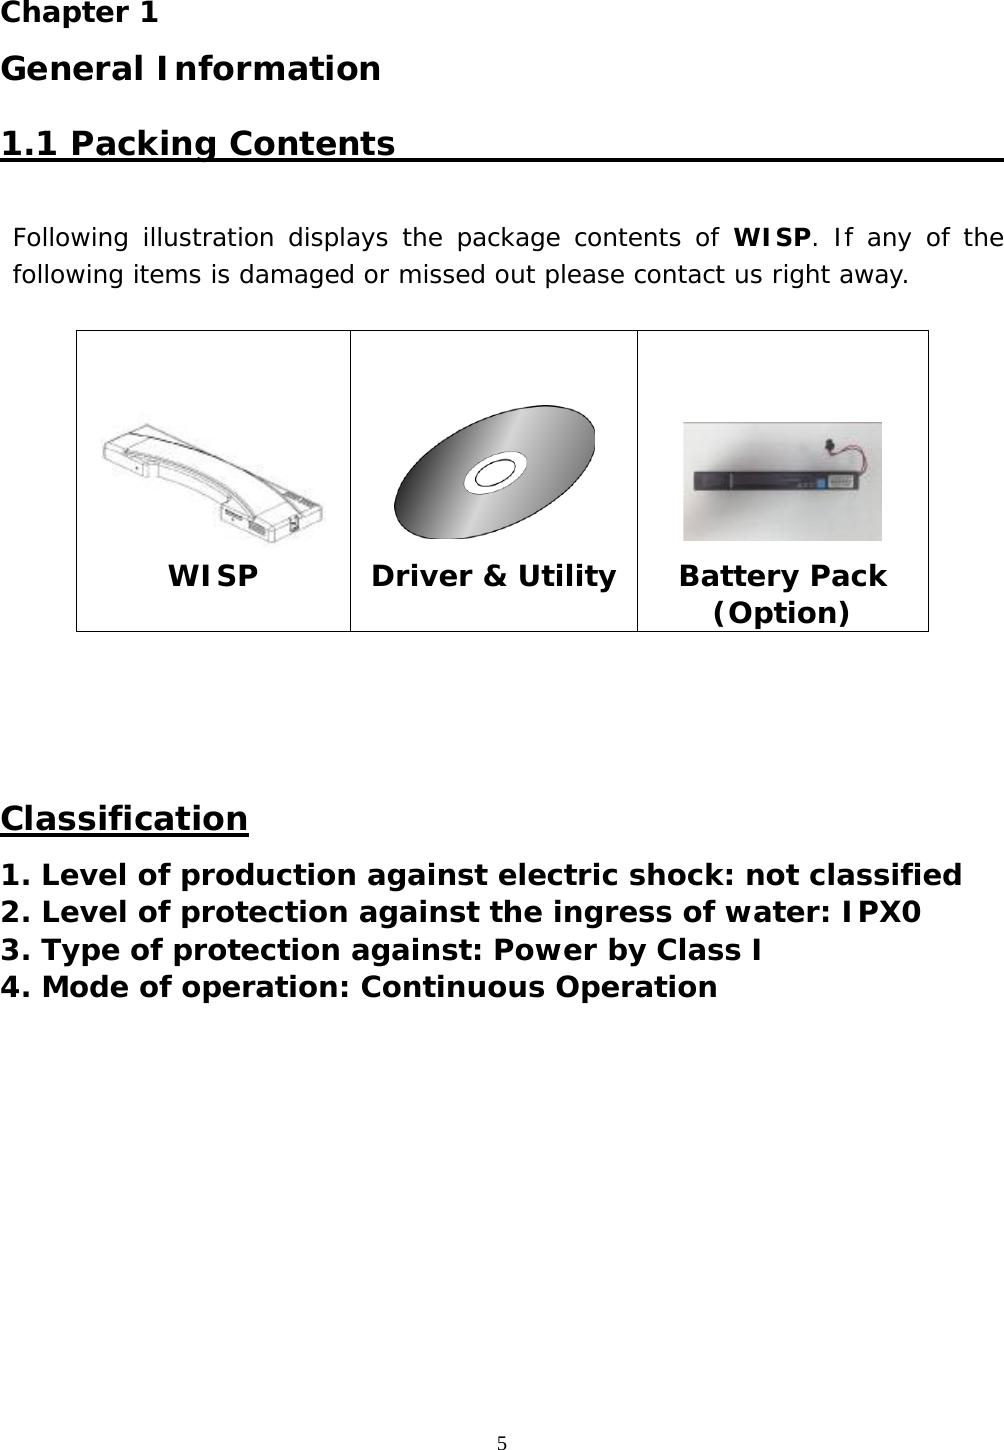  5  Chapter 1  General Information 1.1 Packing Contents                                                   Following illustration displays the package contents of WISP. If any of the following items is damaged or missed out please contact us right away.             Classification 1. Level of production against electric shock: not classified 2. Level of protection against the ingress of water: IPX0 3. Type of protection against: Power by Class I  4. Mode of operation: Continuous Operation              WISP    Driver &amp; Utility     Battery Pack (Option) 